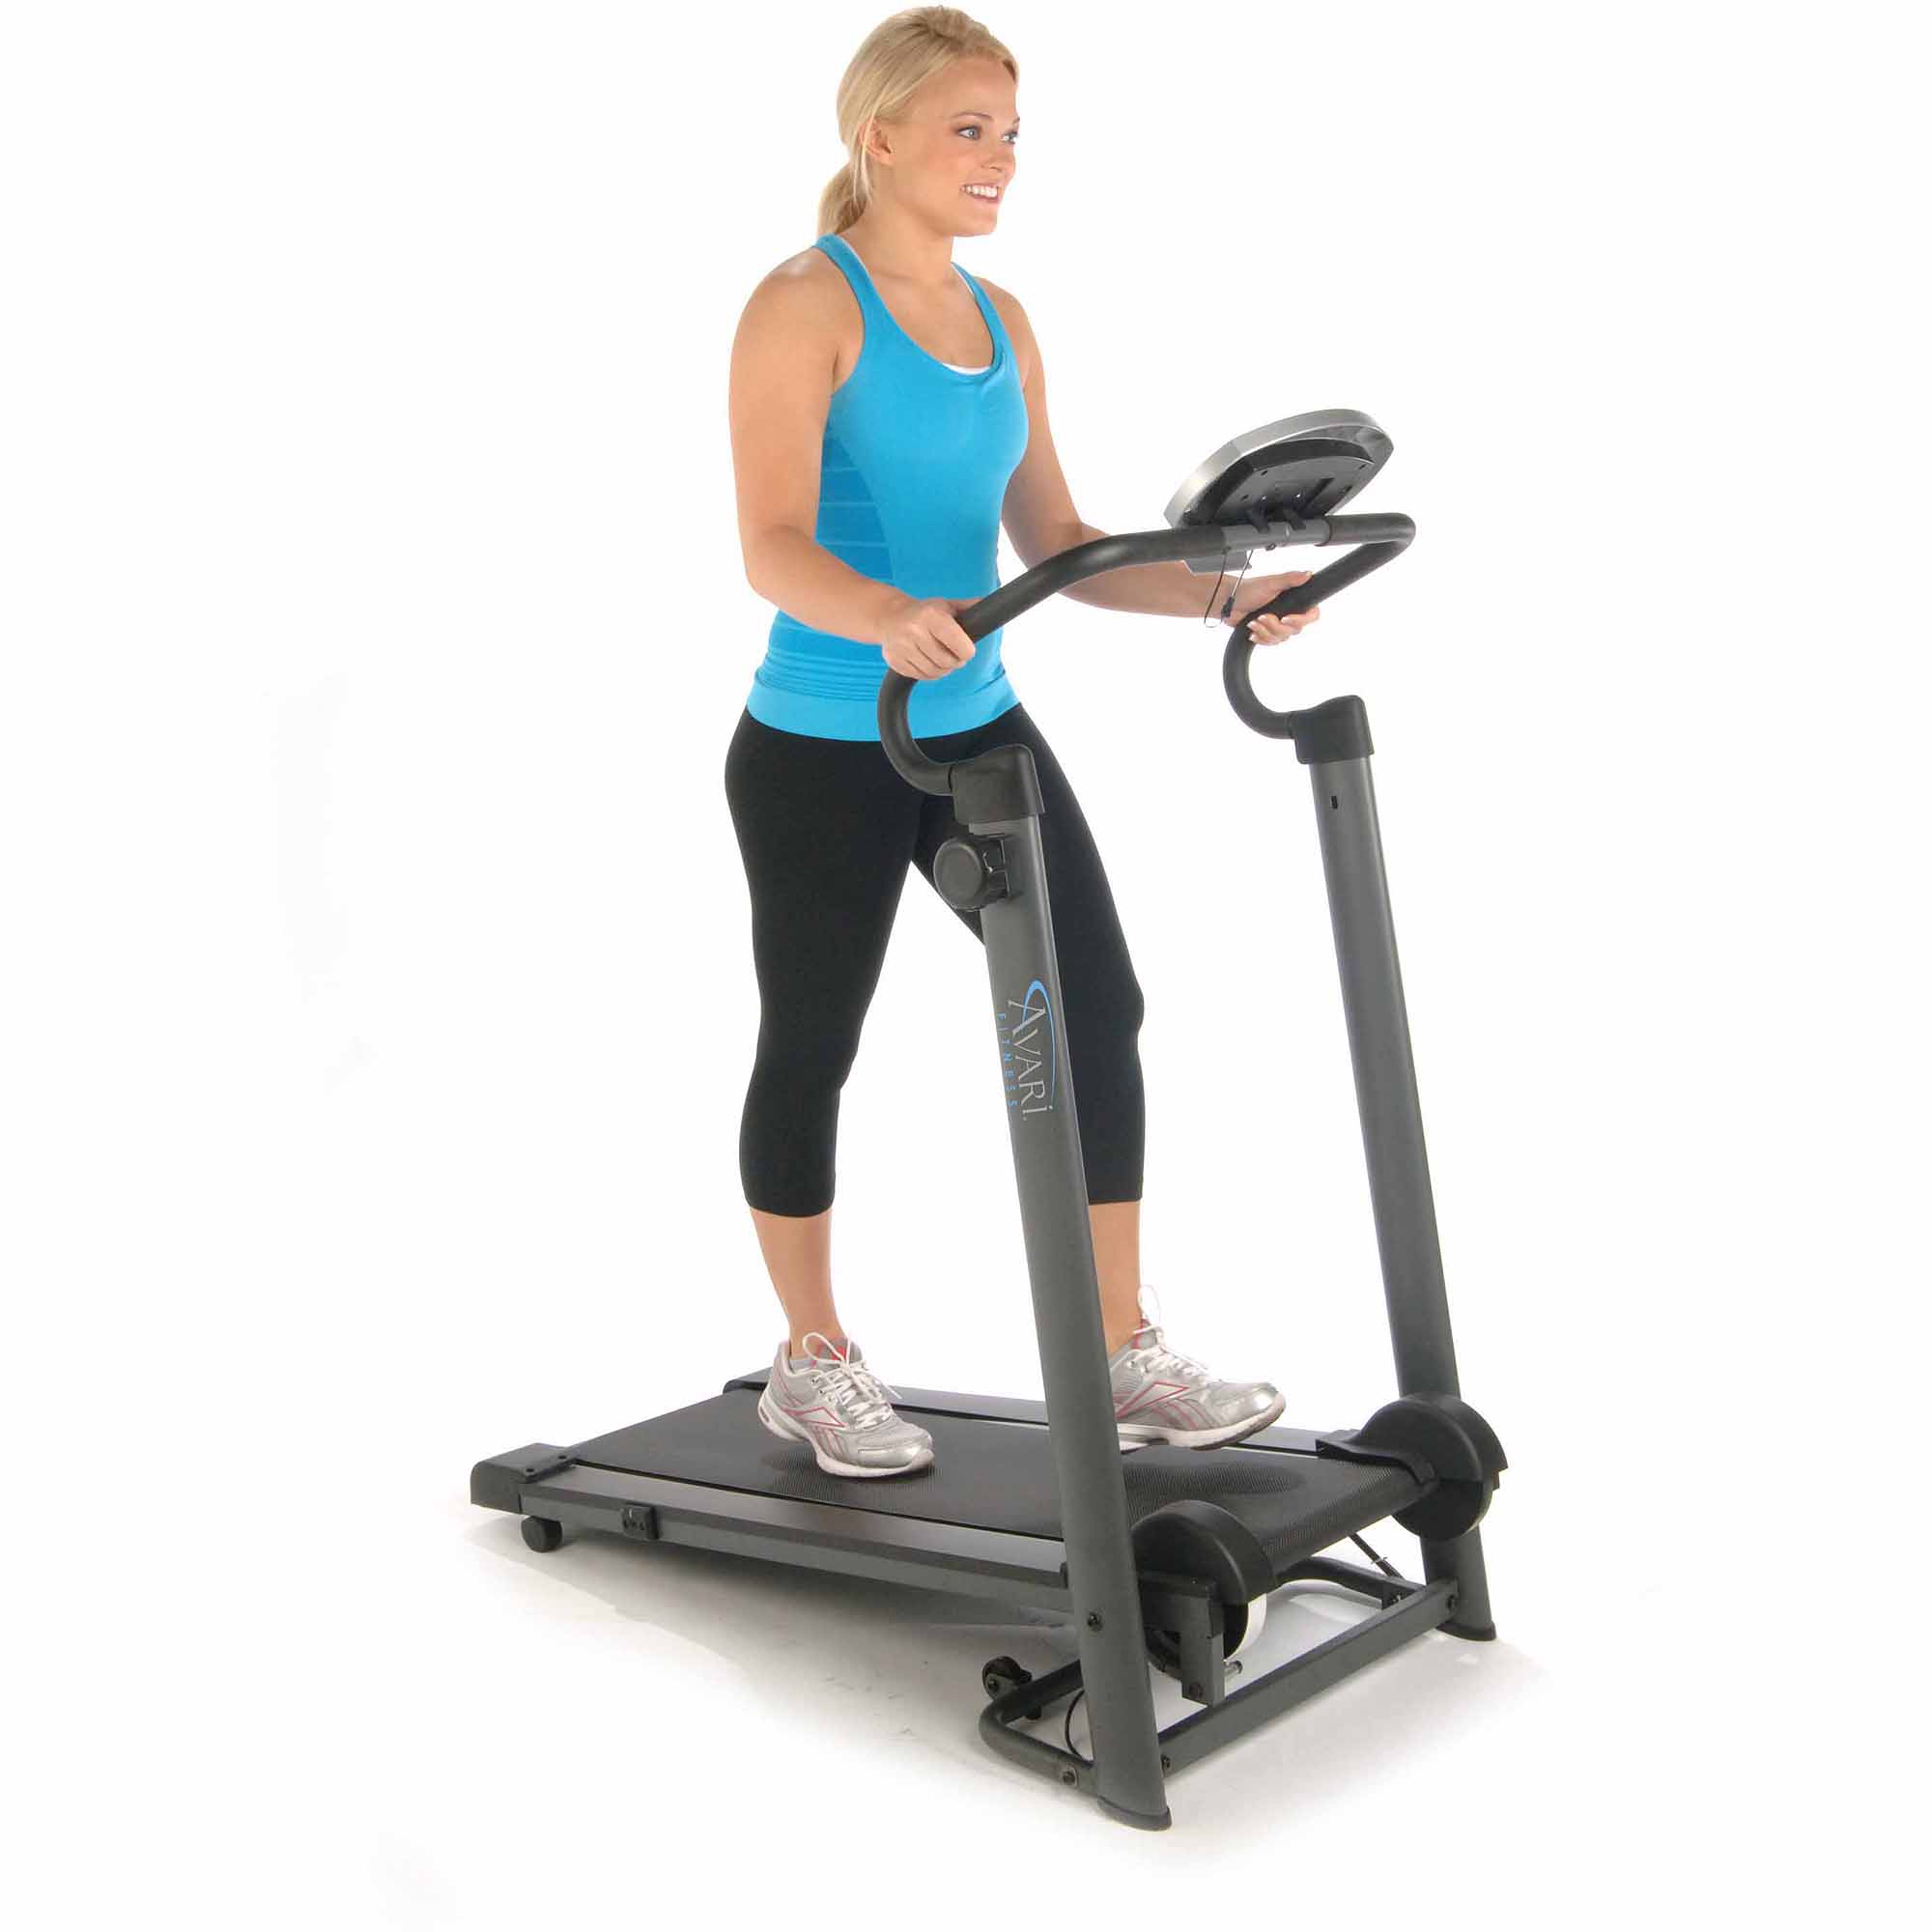 Stamina Products A450-255 Avari Non Electric Magnetic Resistance Treadmill - image 7 of 9